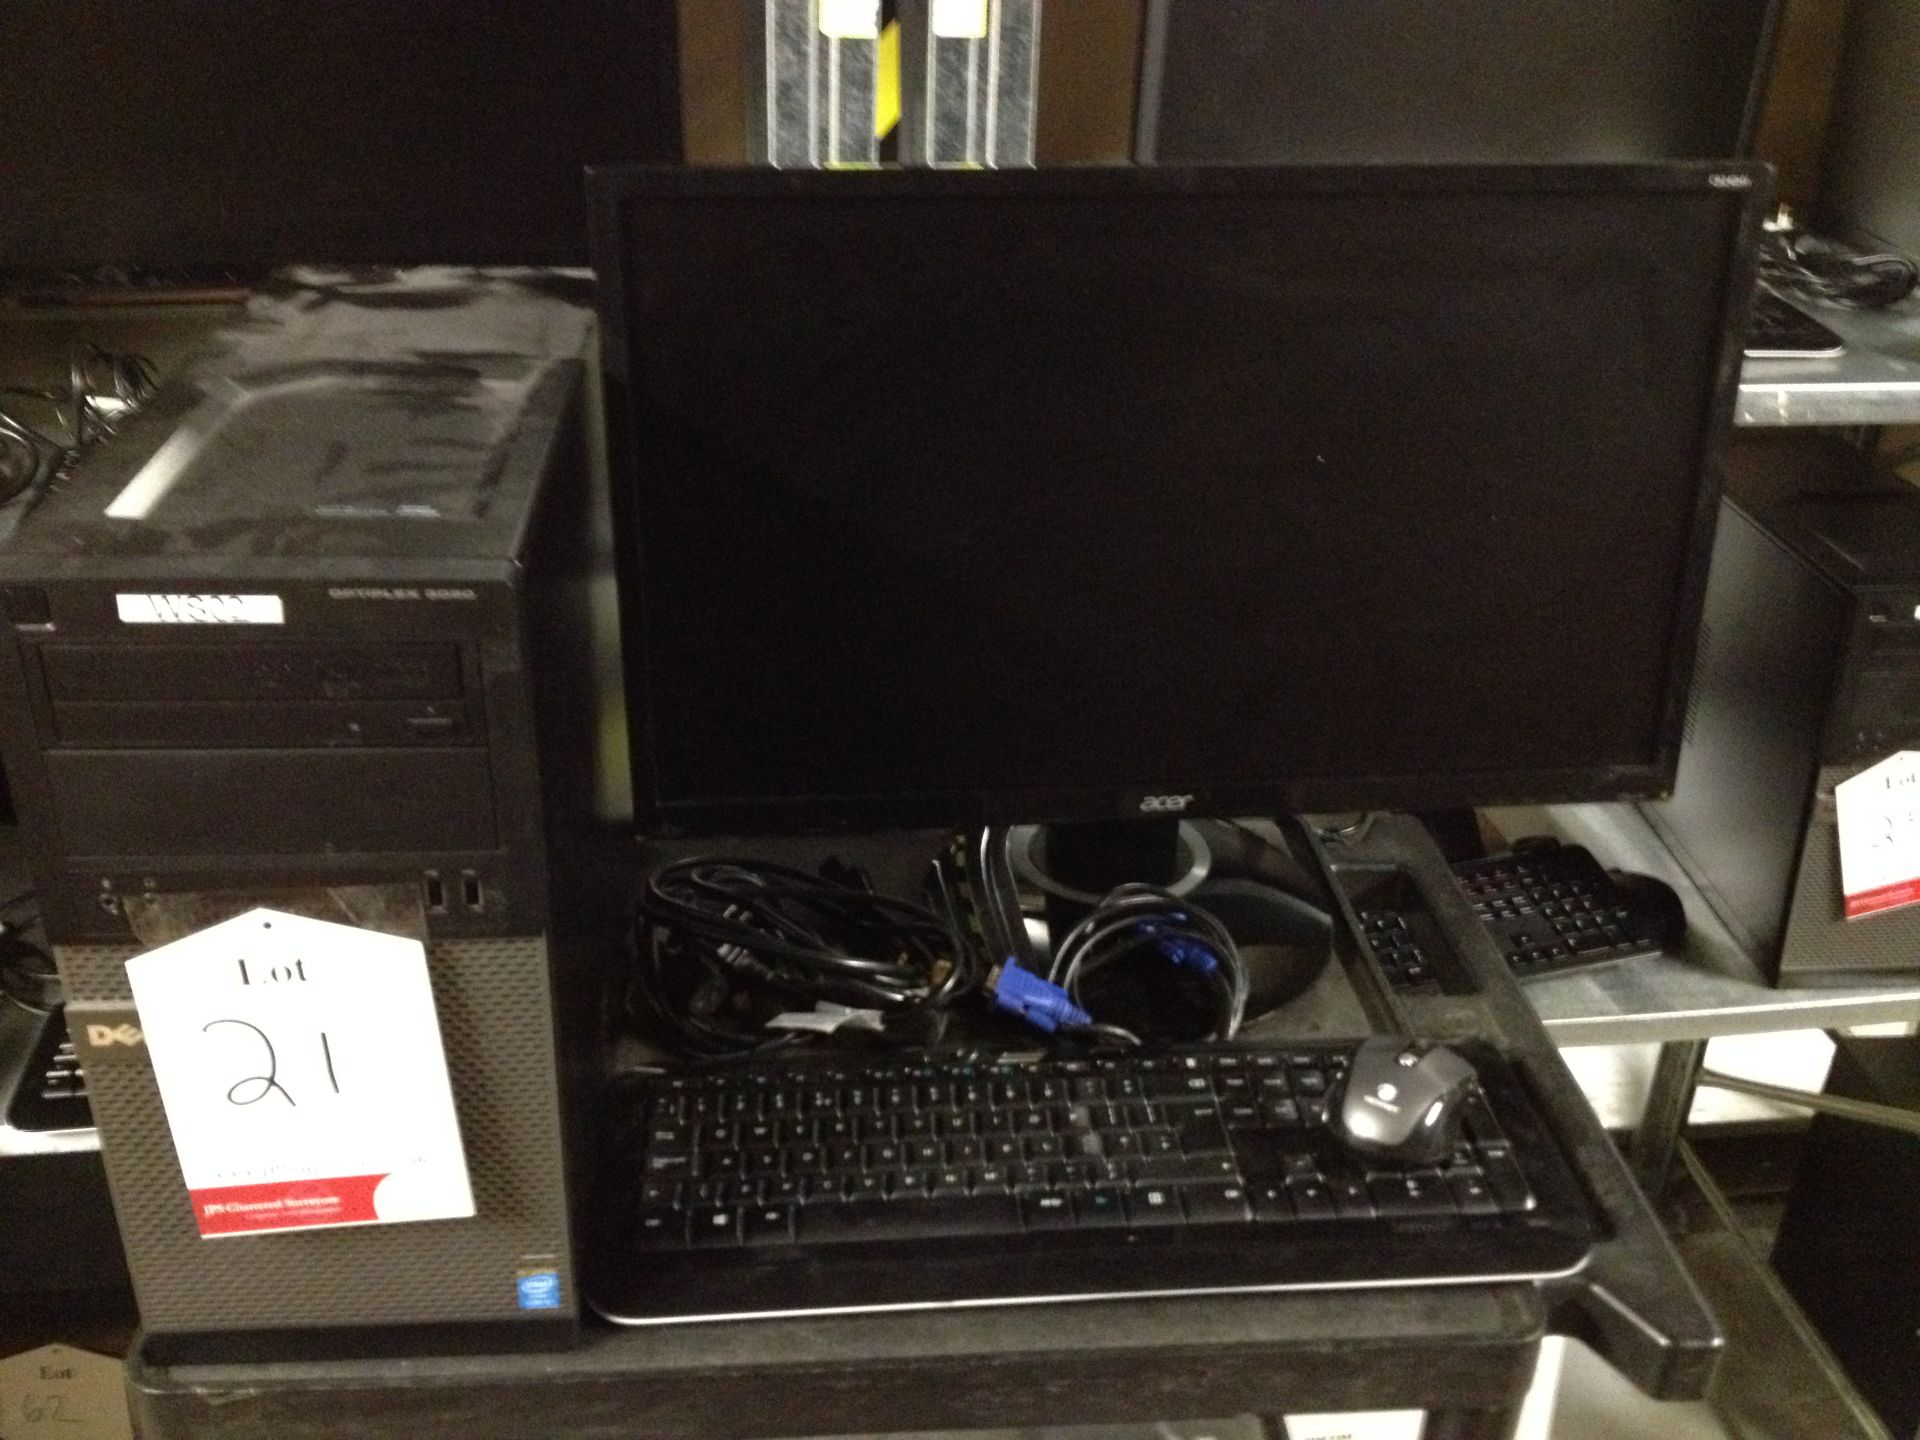 Dell desktop PC Model: D15M Optiplex3020 with monitor, keyboard and mouse